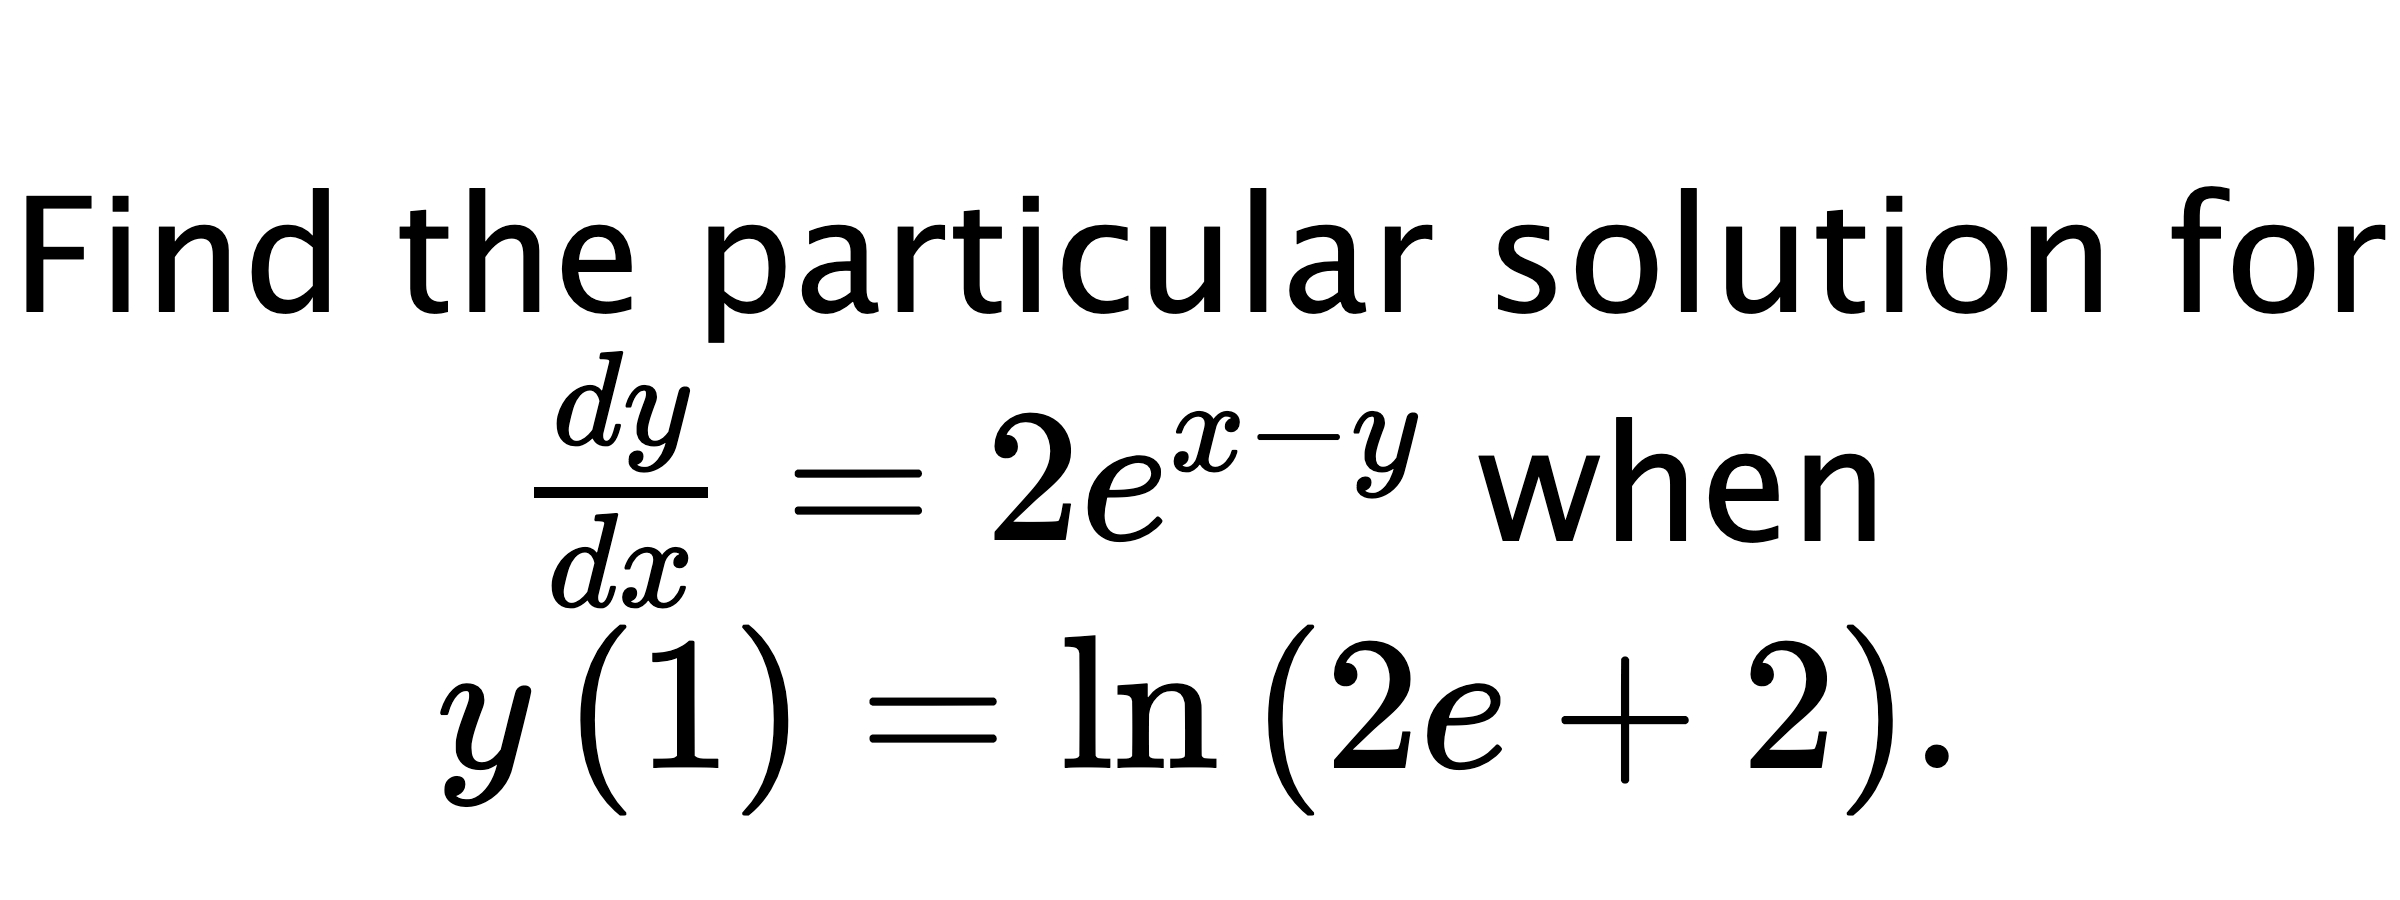  Find the particular solution for $ \frac{dy}{dx}=2e^{x-y} $ when $ y\left( 1 \right)=\ln{\left(2e+2\right)}. $